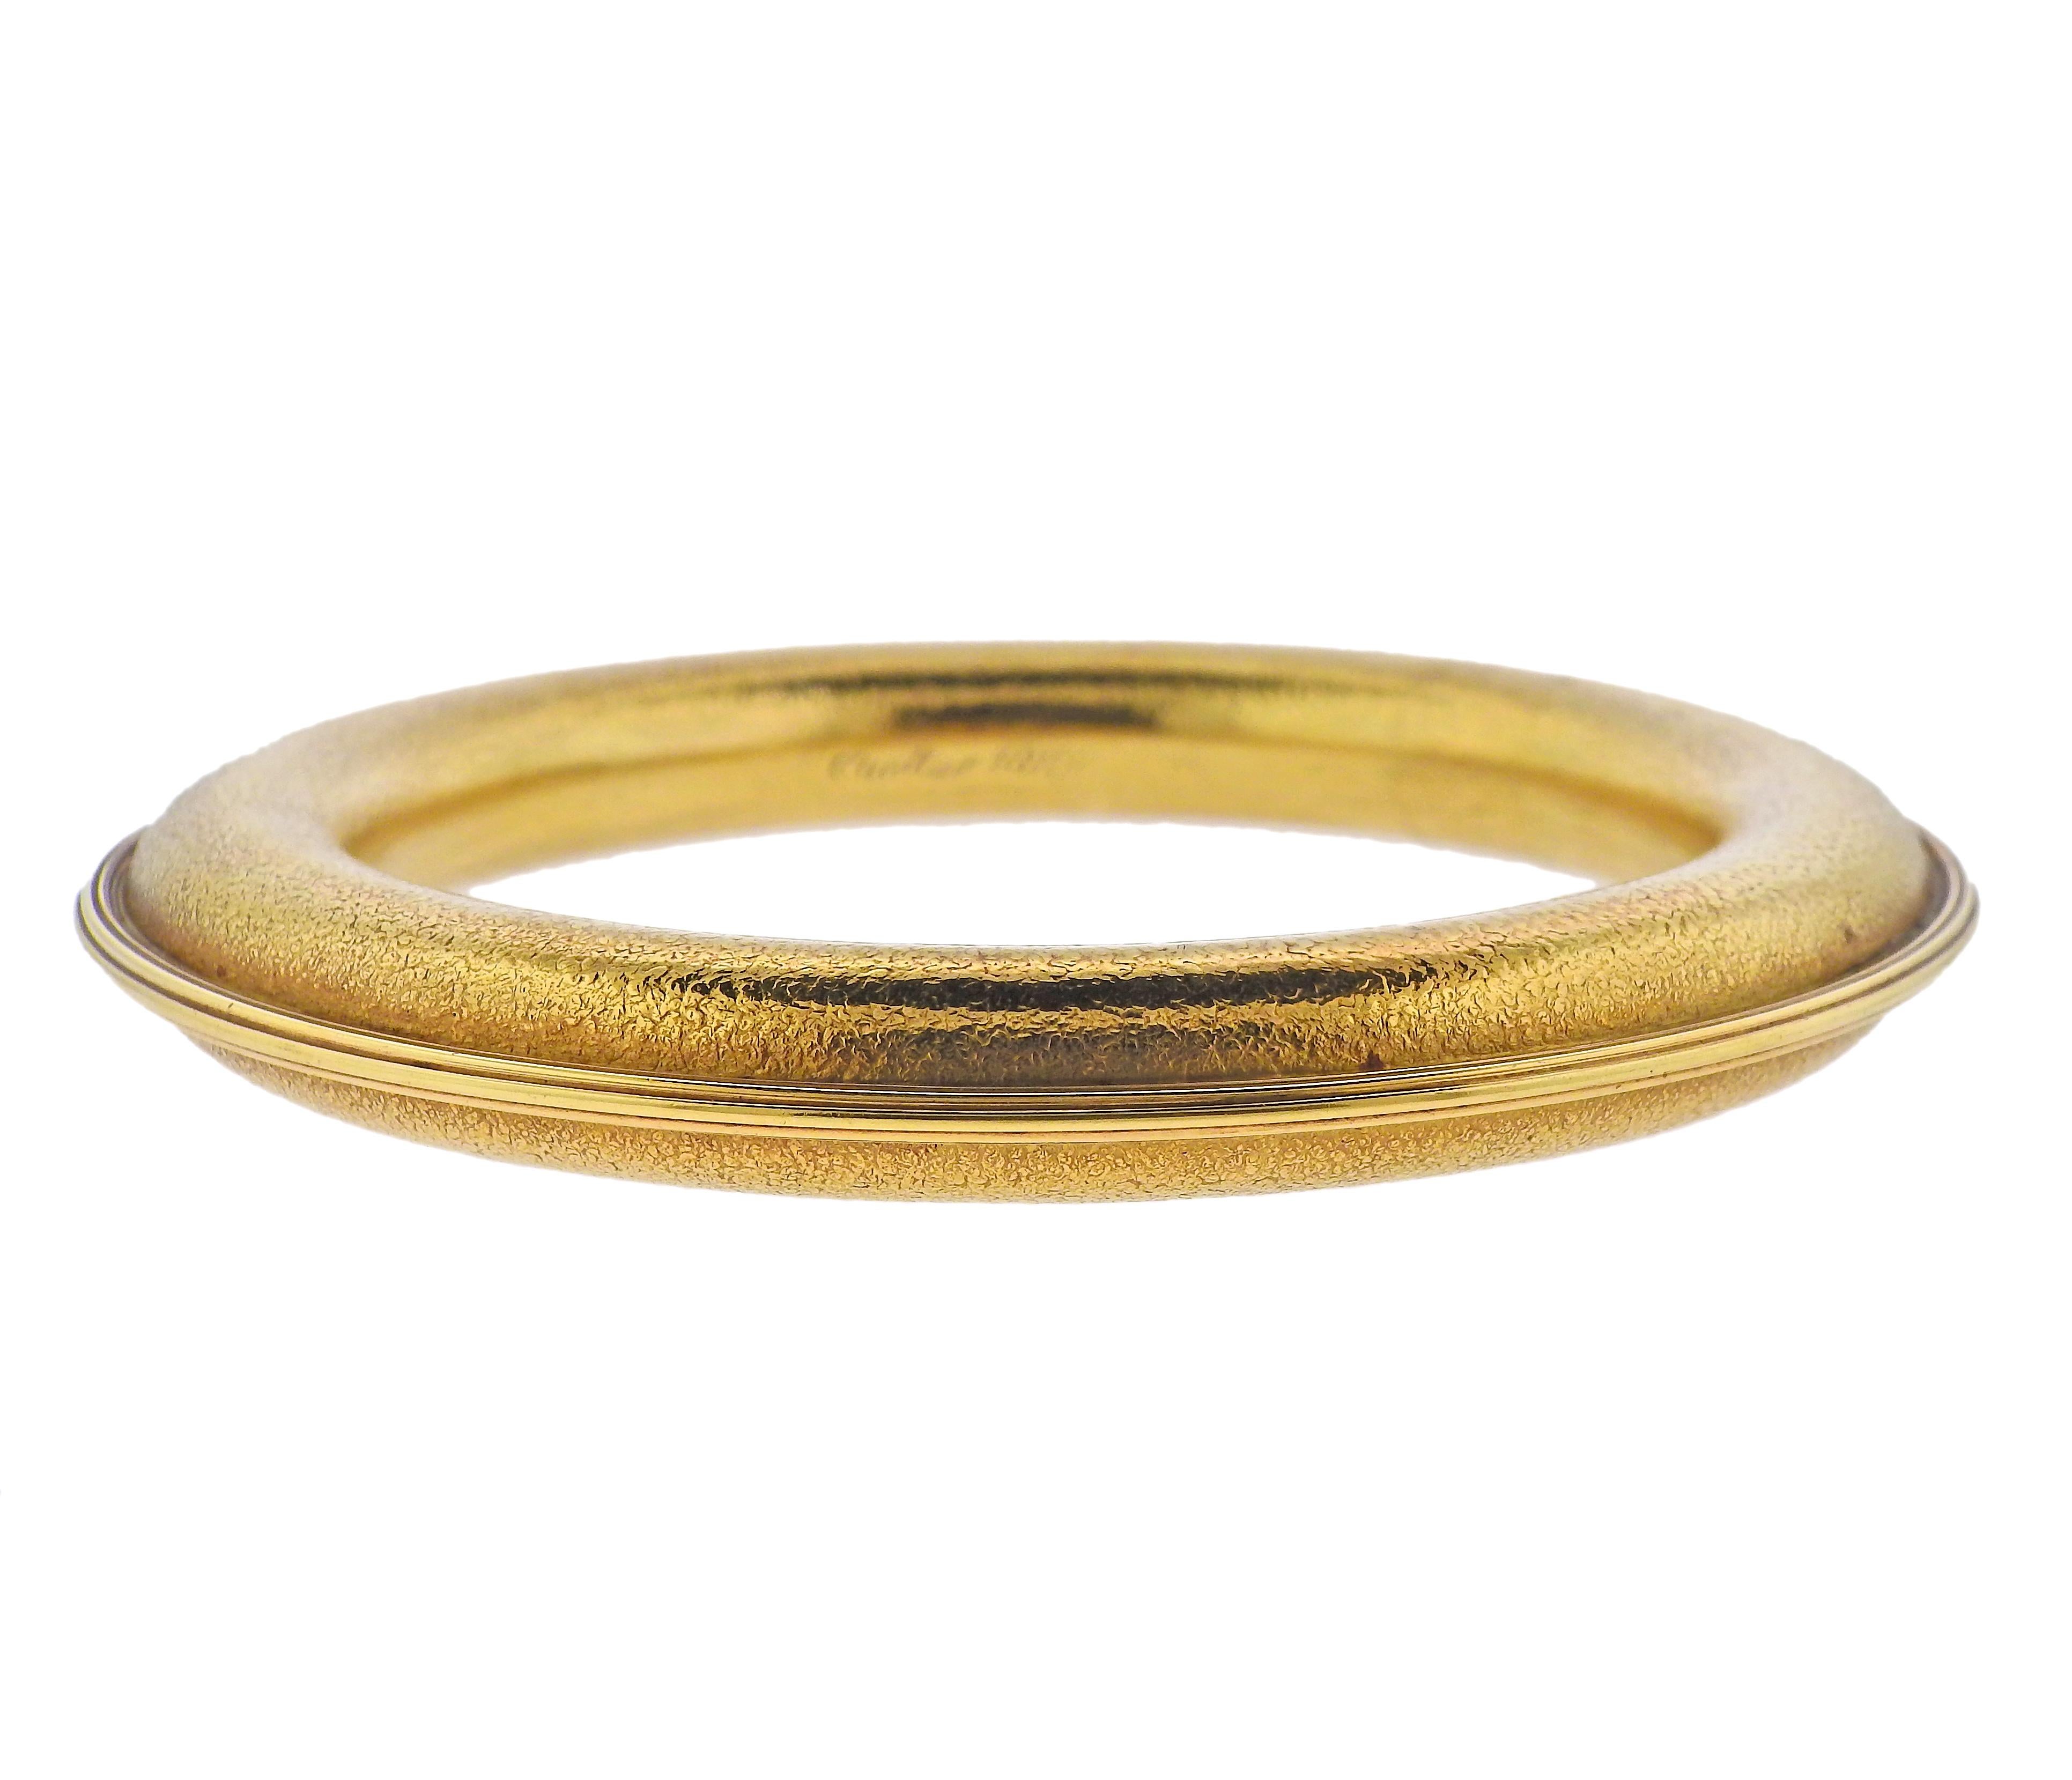 Whimsical 18k textured gold arm cuff bracelet by Cartier. Inner diameter is 3